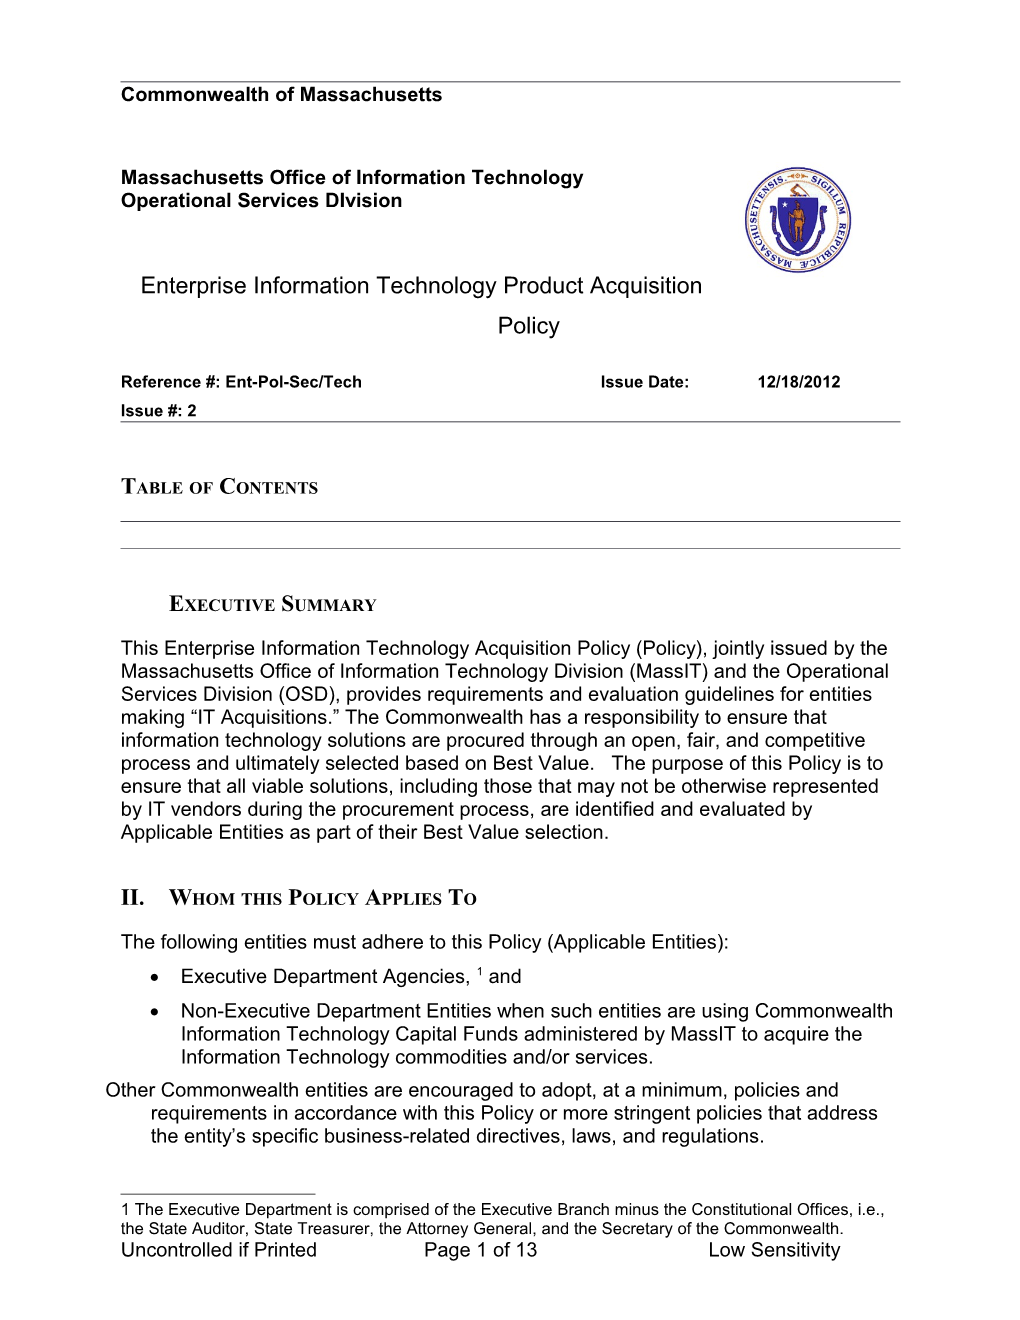 Enterprise Information Technology Product Acquisition Policy